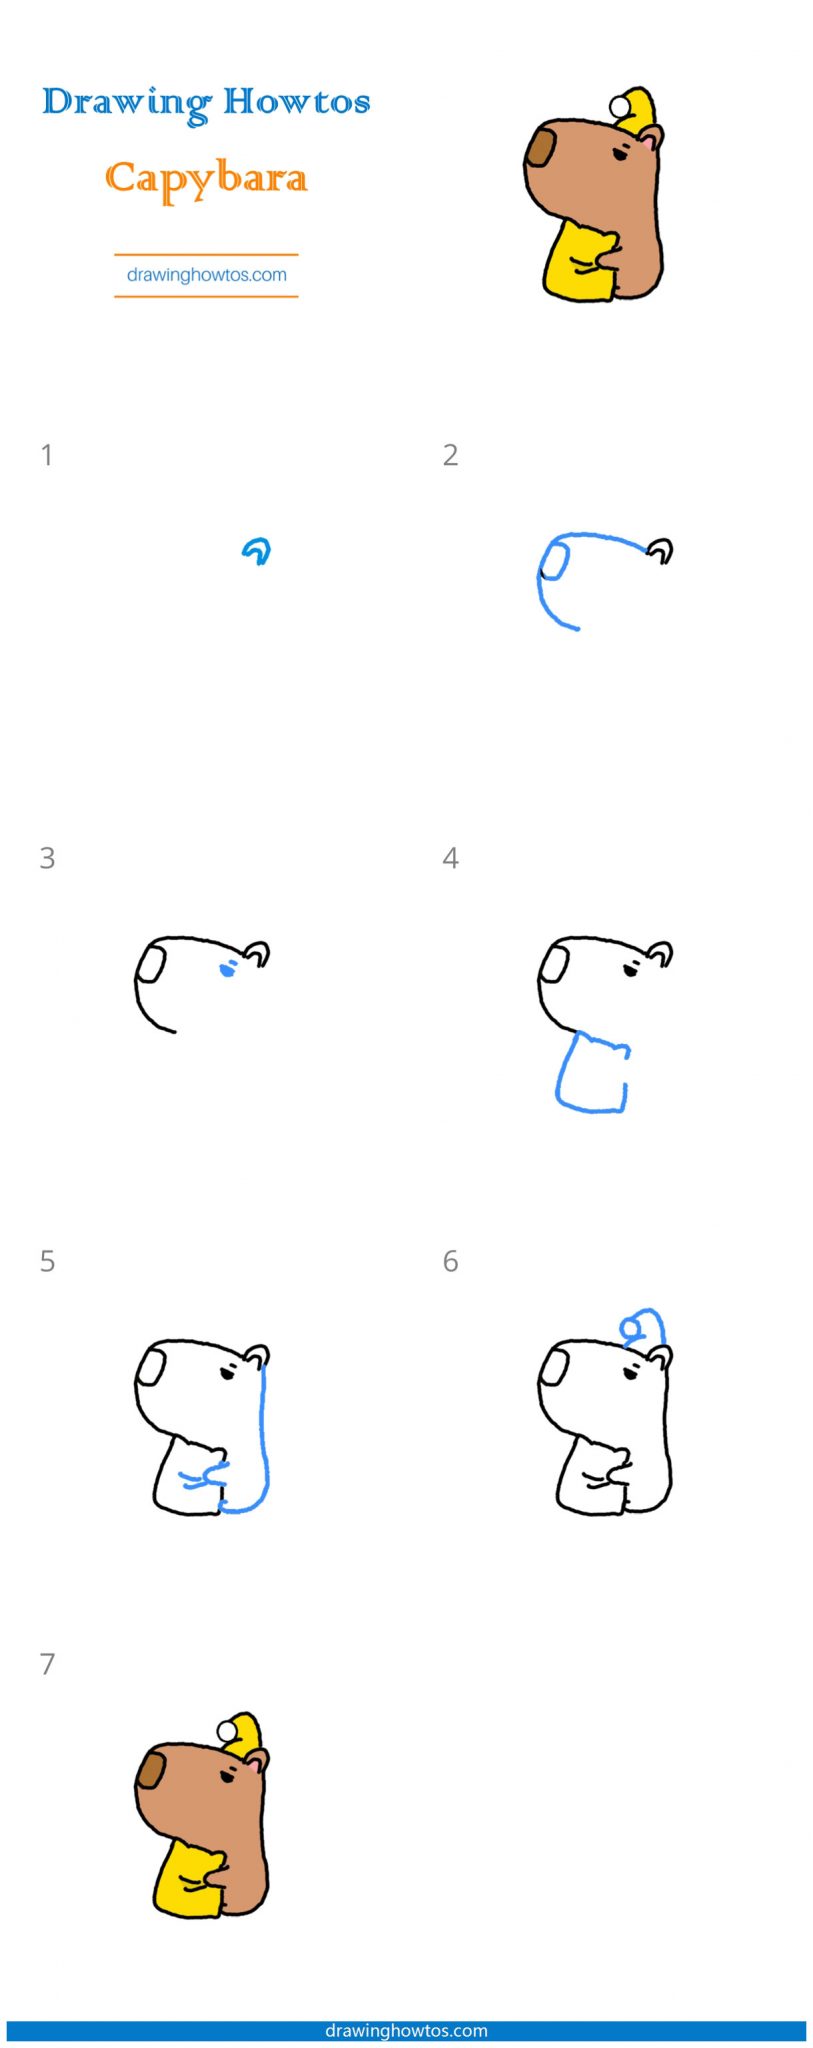 How to Draw a Cute Capybara - Step by Step Easy Drawing Guides